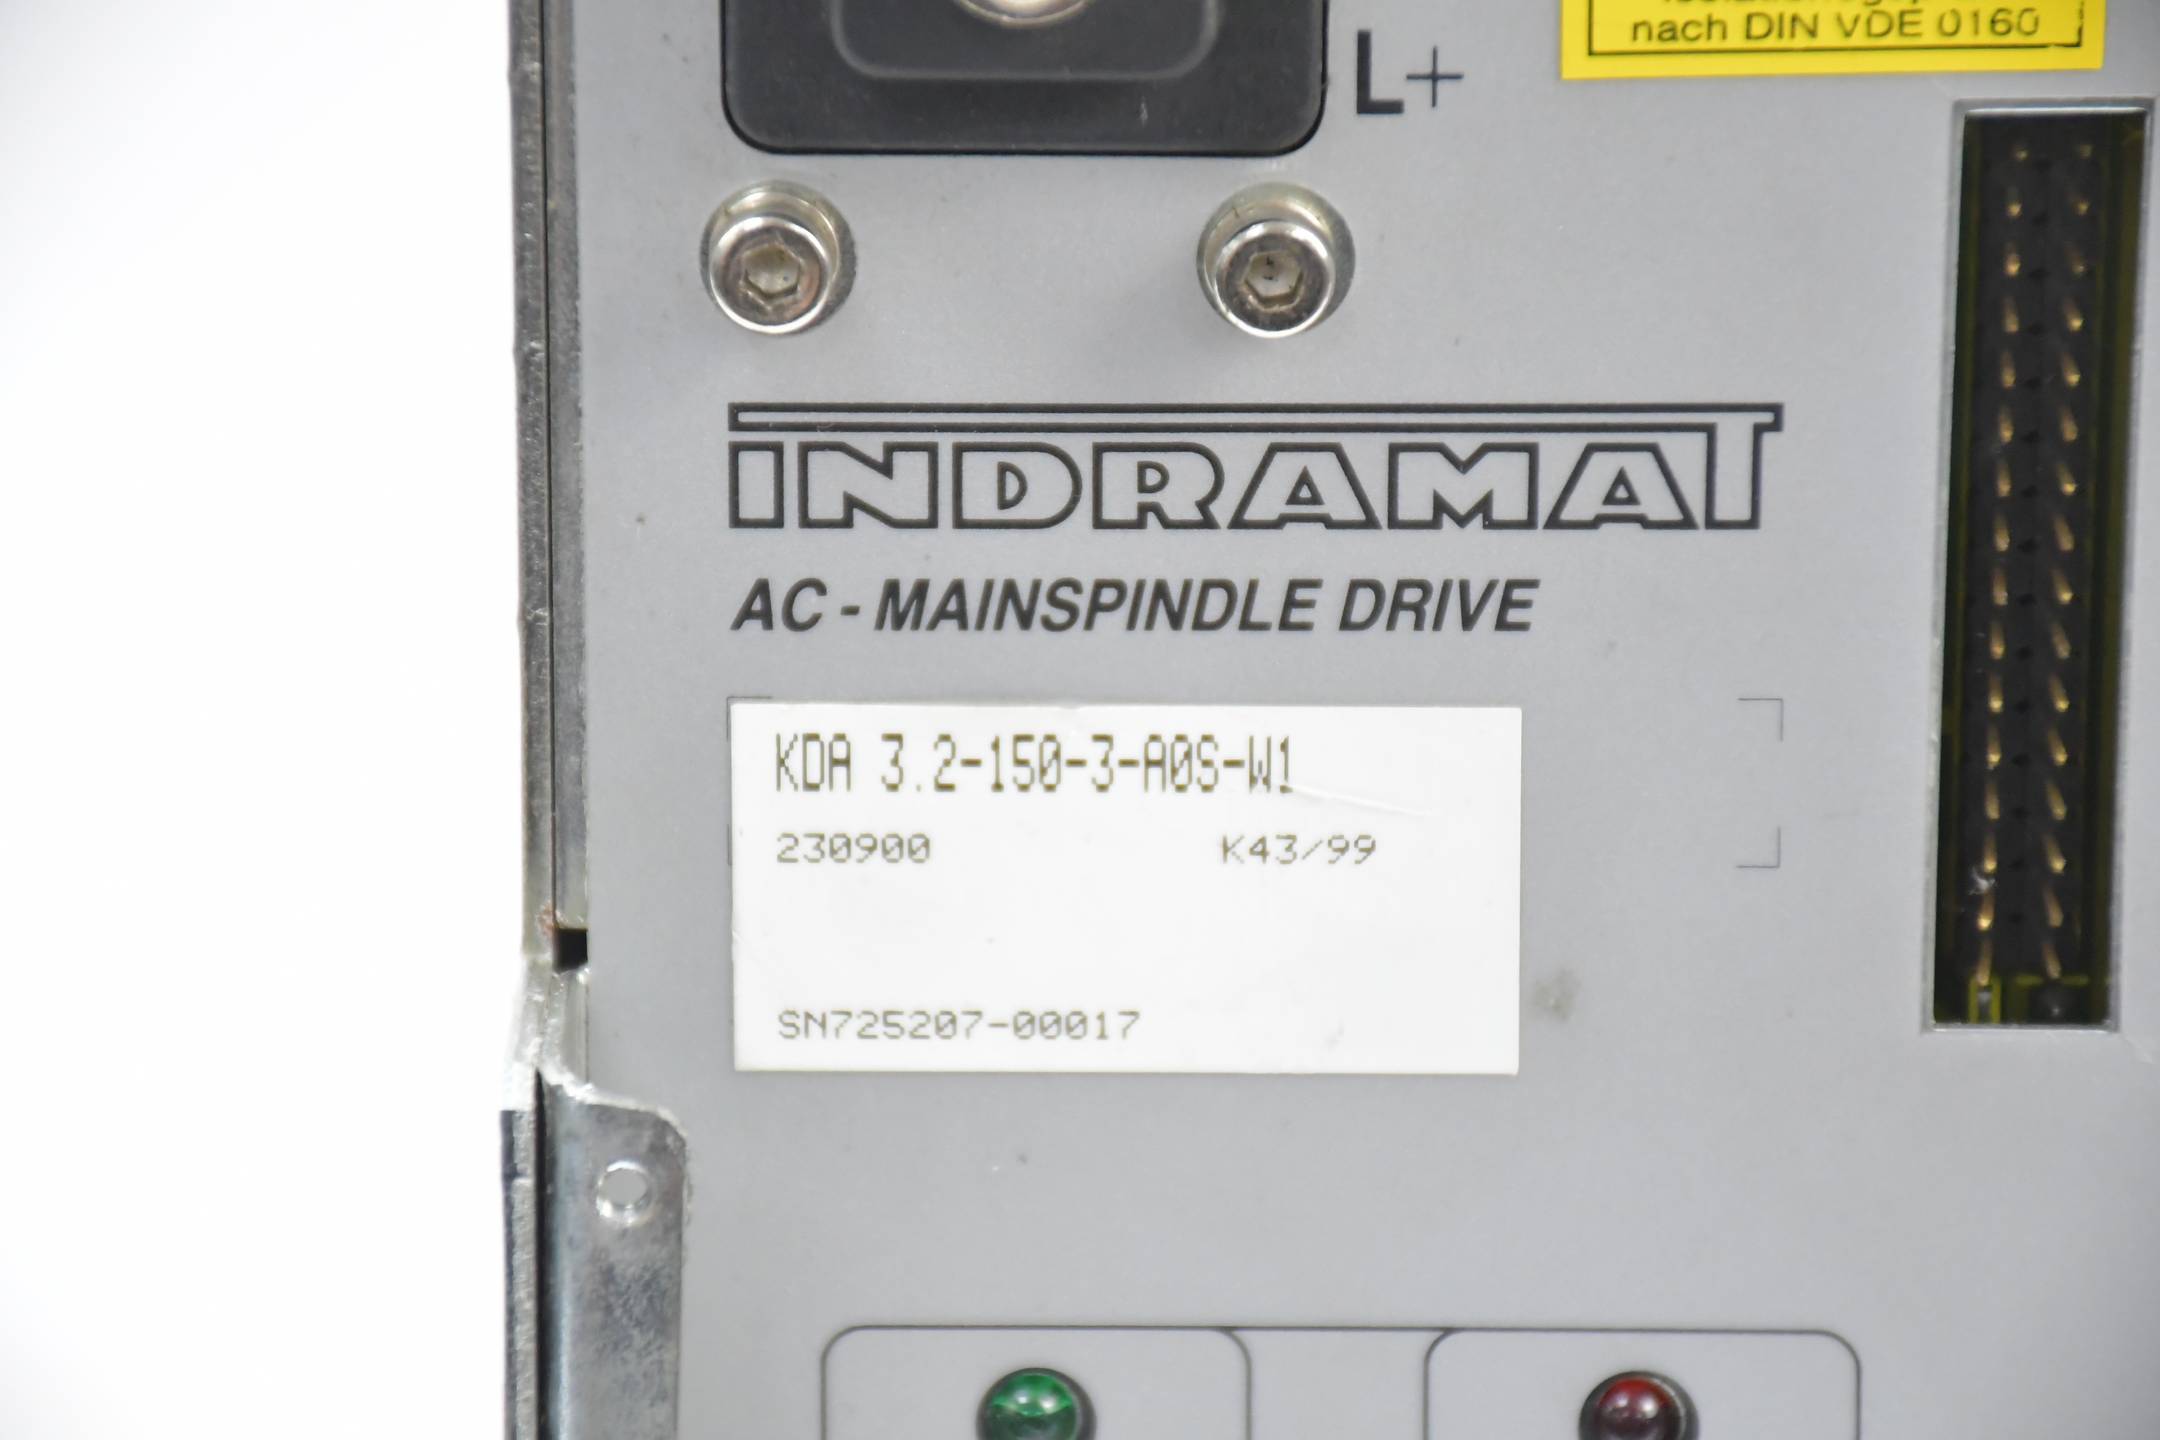 Indramat AC Mainspindle Drive KDA 3.2-150-3-A0S-W1